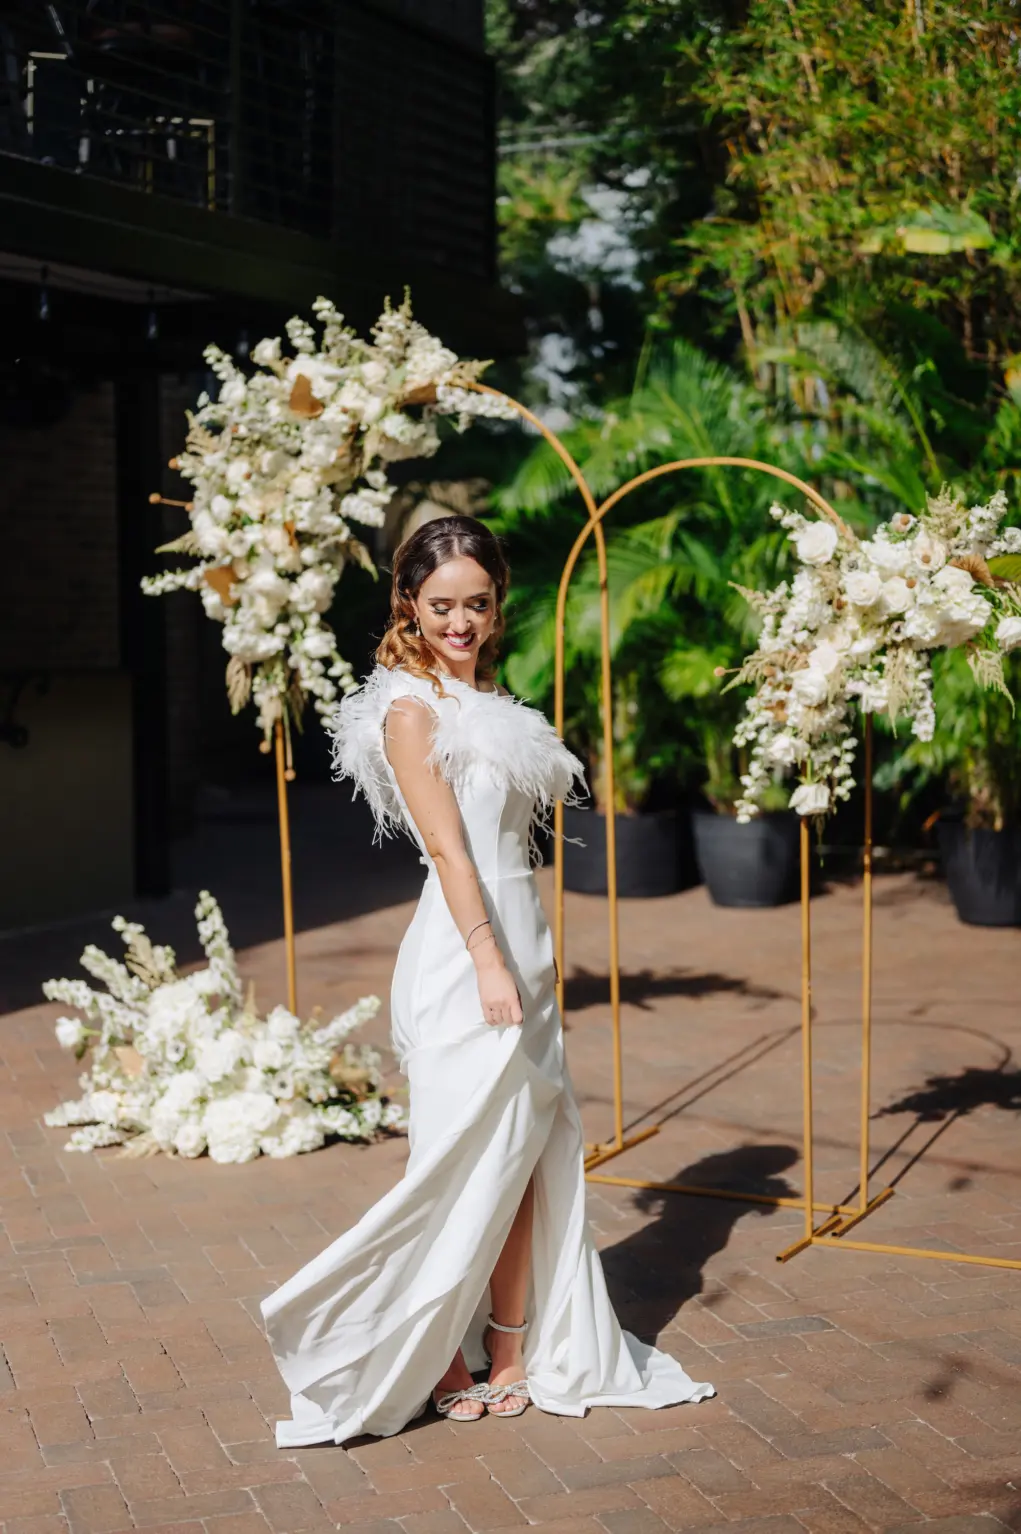 Modern White Wedding Ceremony Flowers Ideas with Gold Arch and Feathered 1920s Great Gatsby Inspired Dress | Tampa Florist Marigold Flower Co | Dress Truly Forever Bridal | Hair and Makeup Michele Renee The Studio